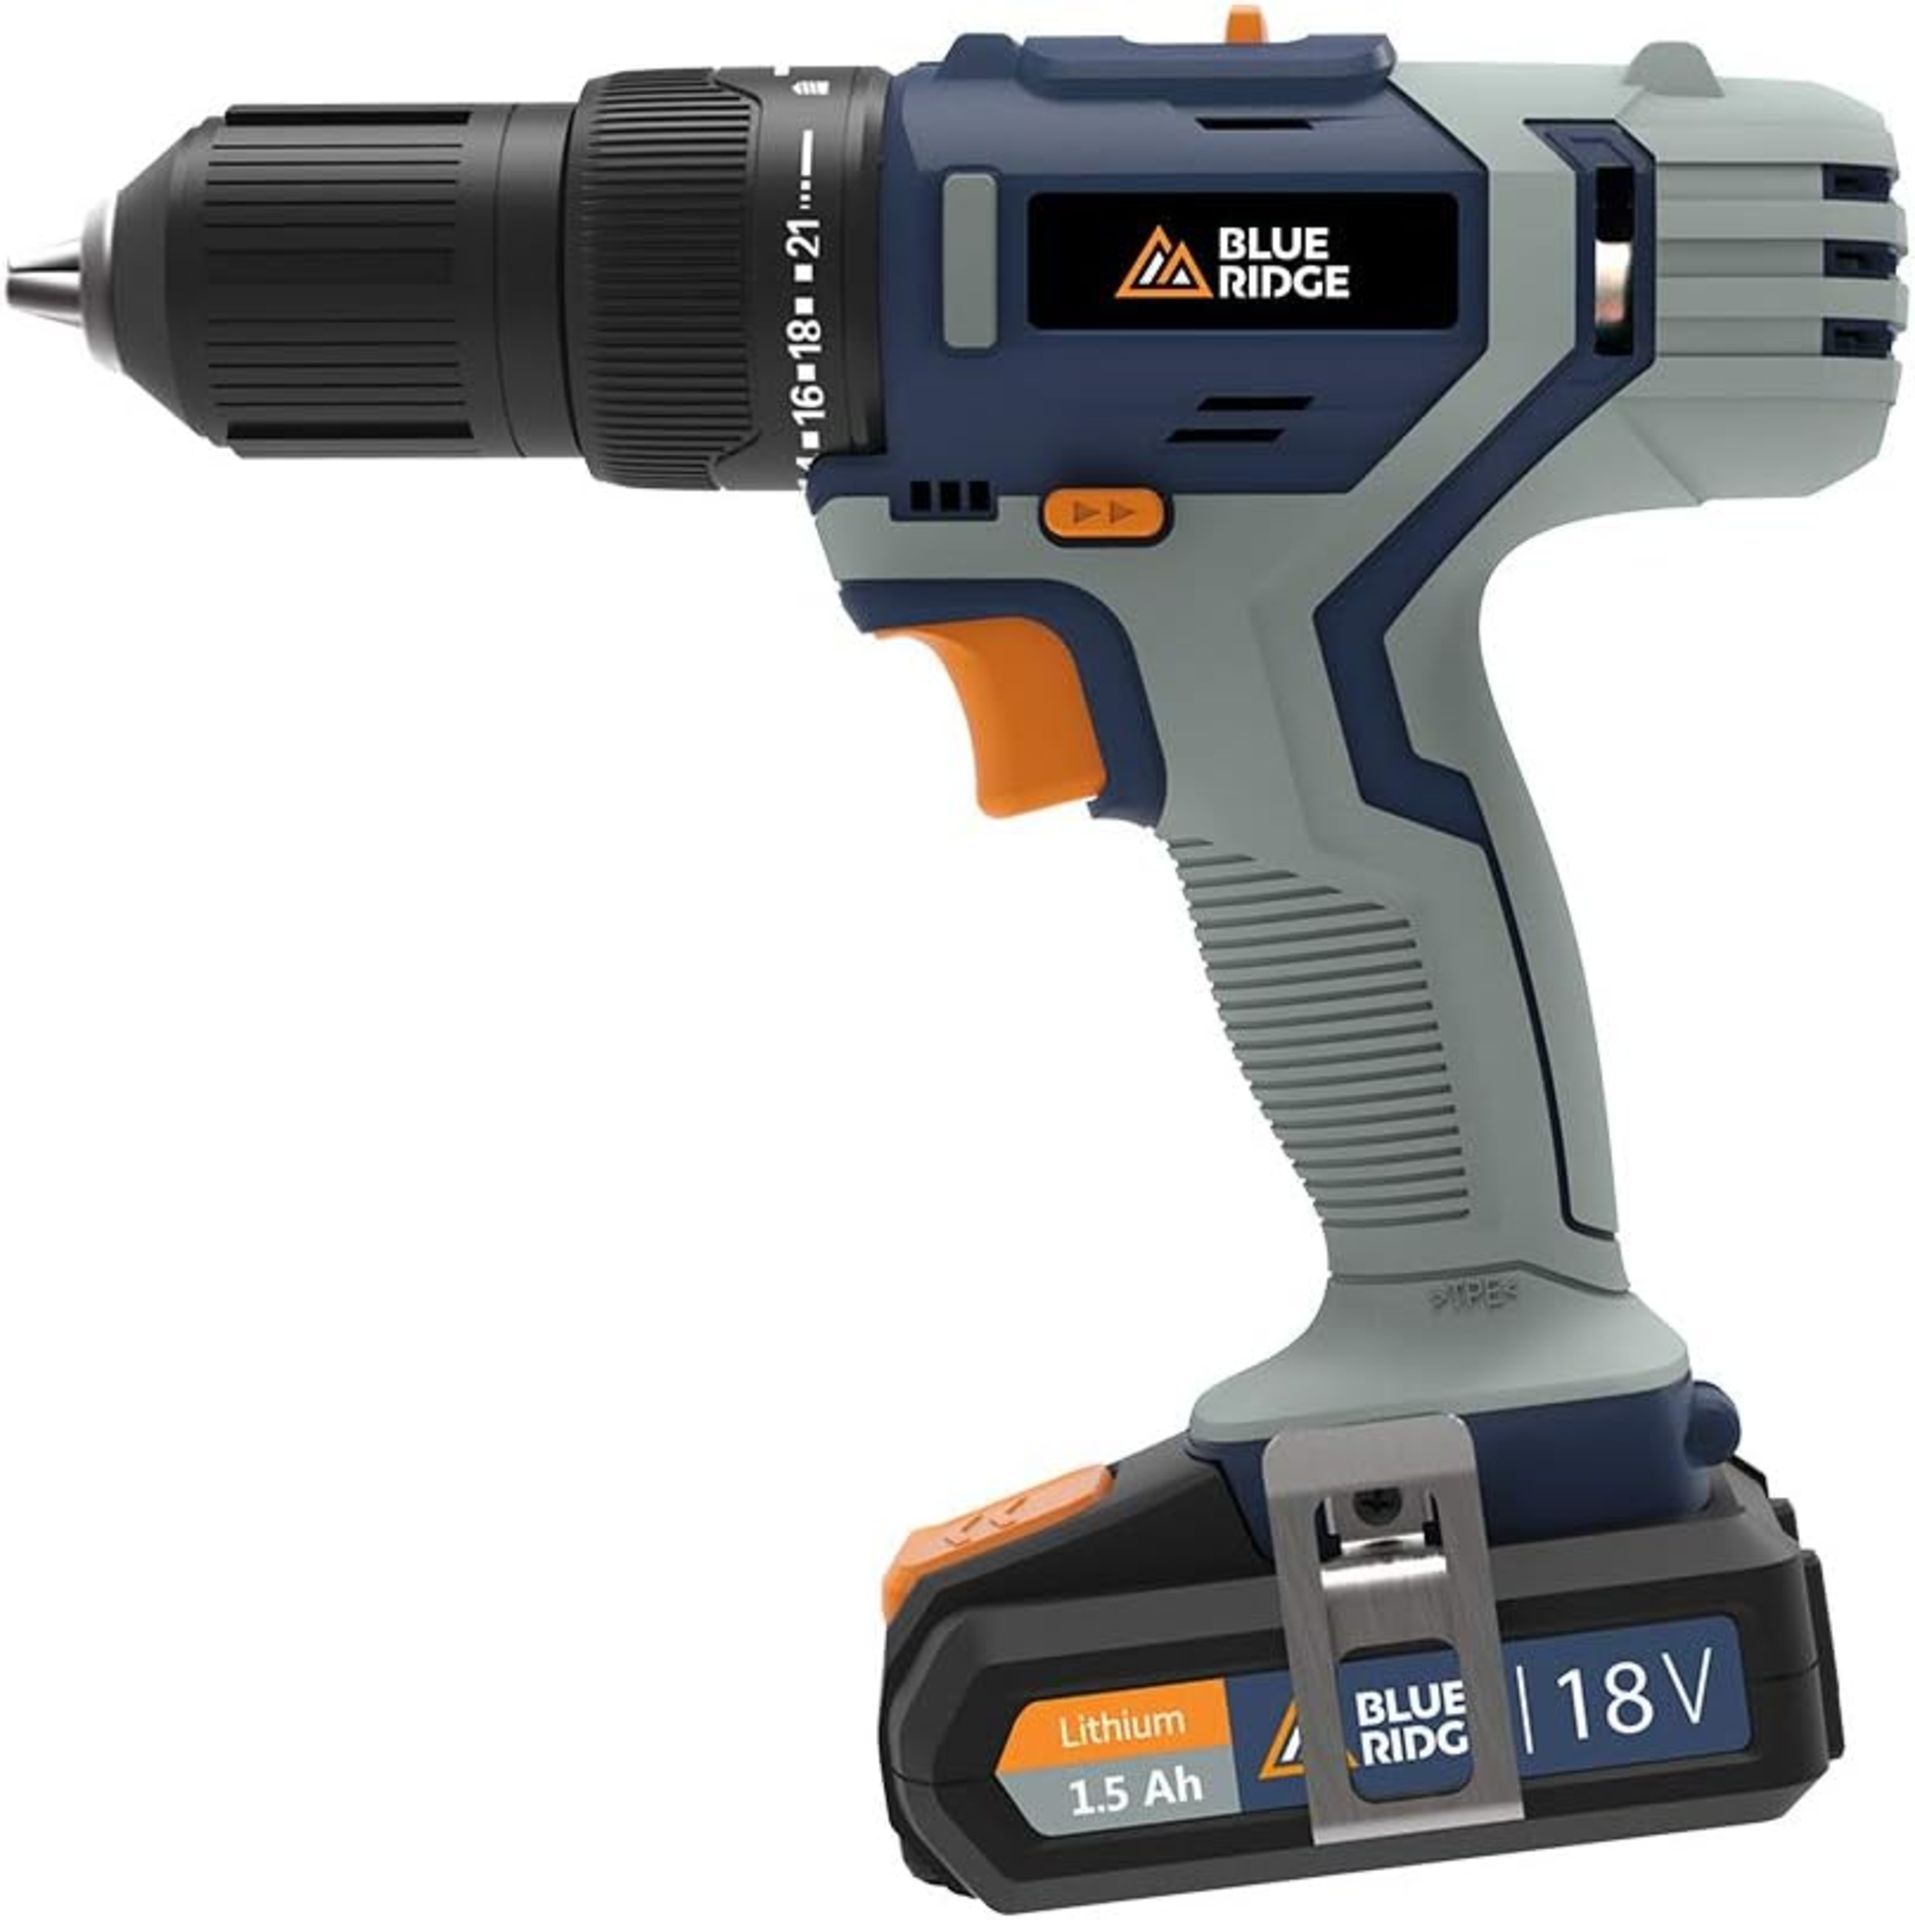 NEW & BOXED BLUE RIDGE 18V Cordless Hammer Drill with 2 x 1.5 Ah Li-ion Batteries & 43 Piece - Image 2 of 4